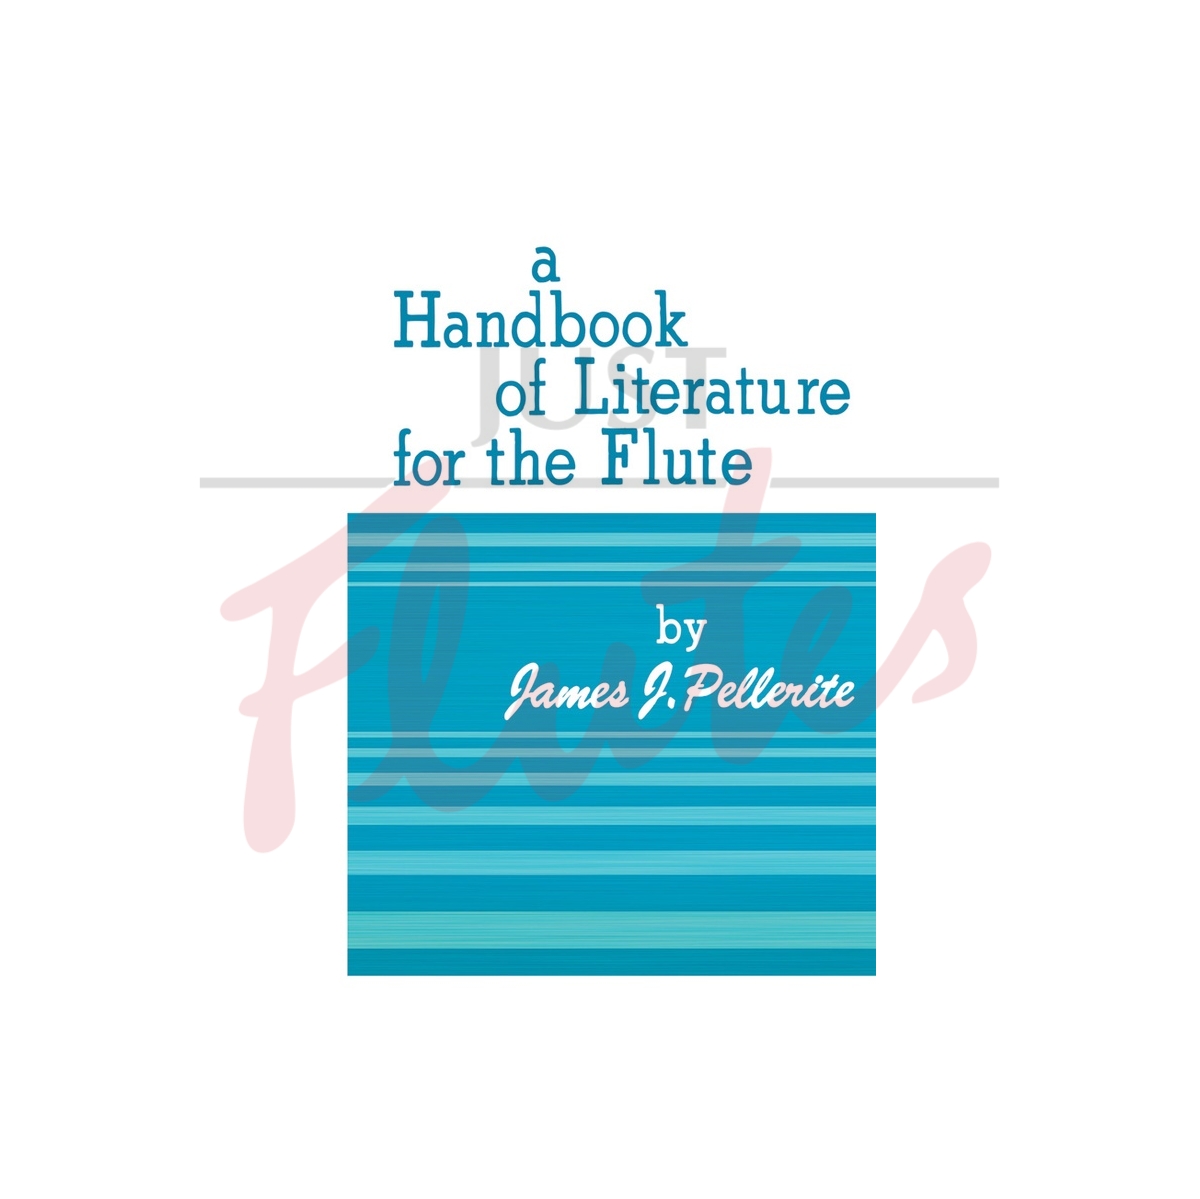 A Handbook of Literature for the Flute